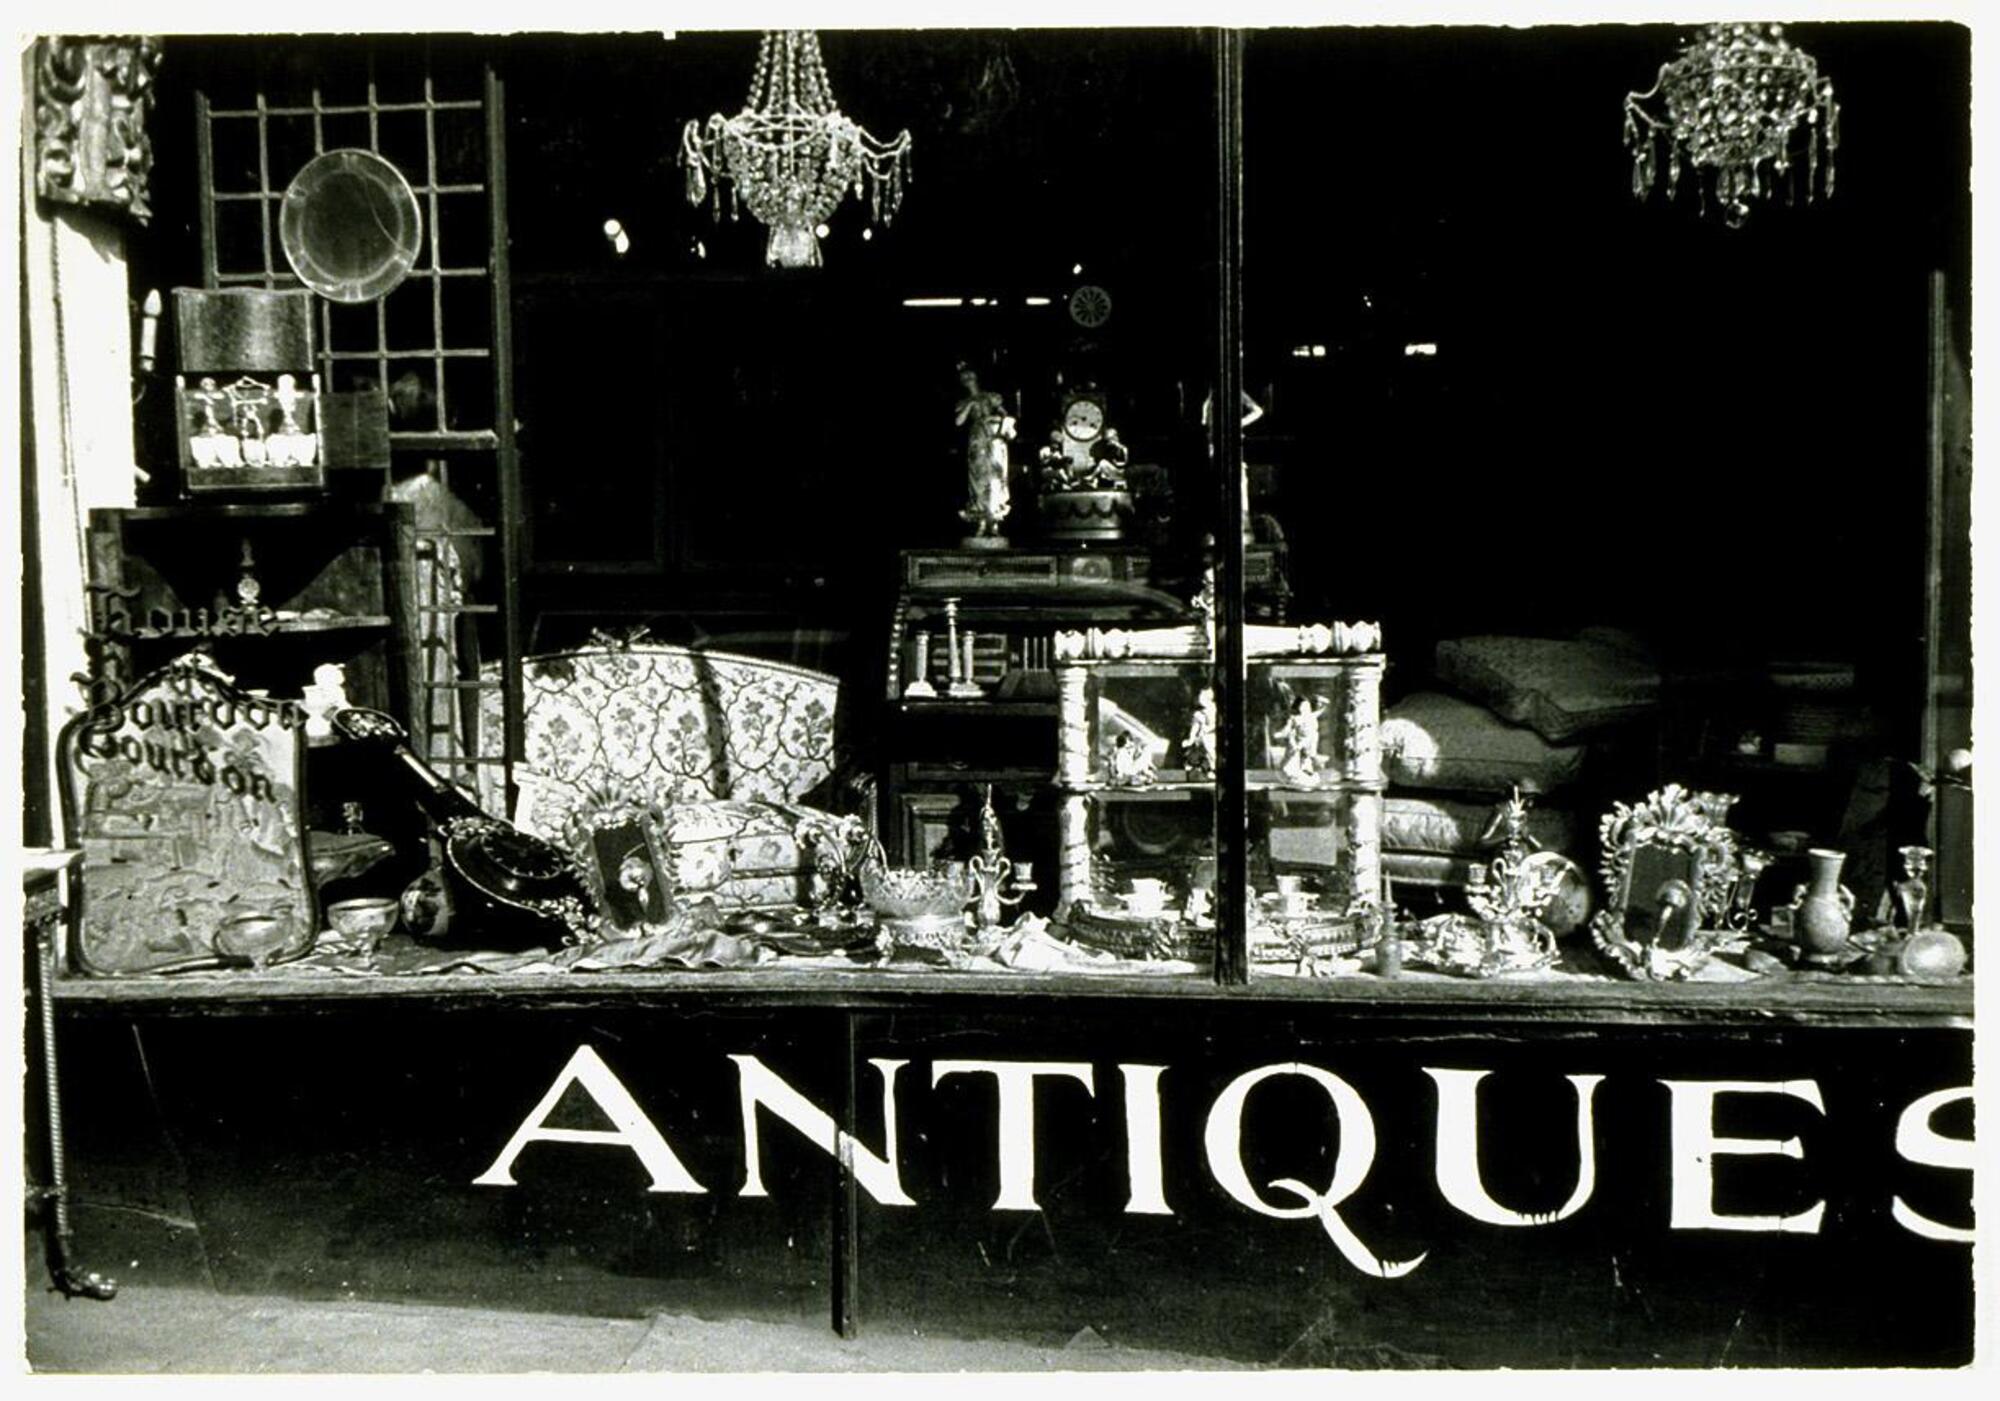 This photograph shows a view of an antique store's front vitrine, featuring a variety of decorative objects and furnishings.